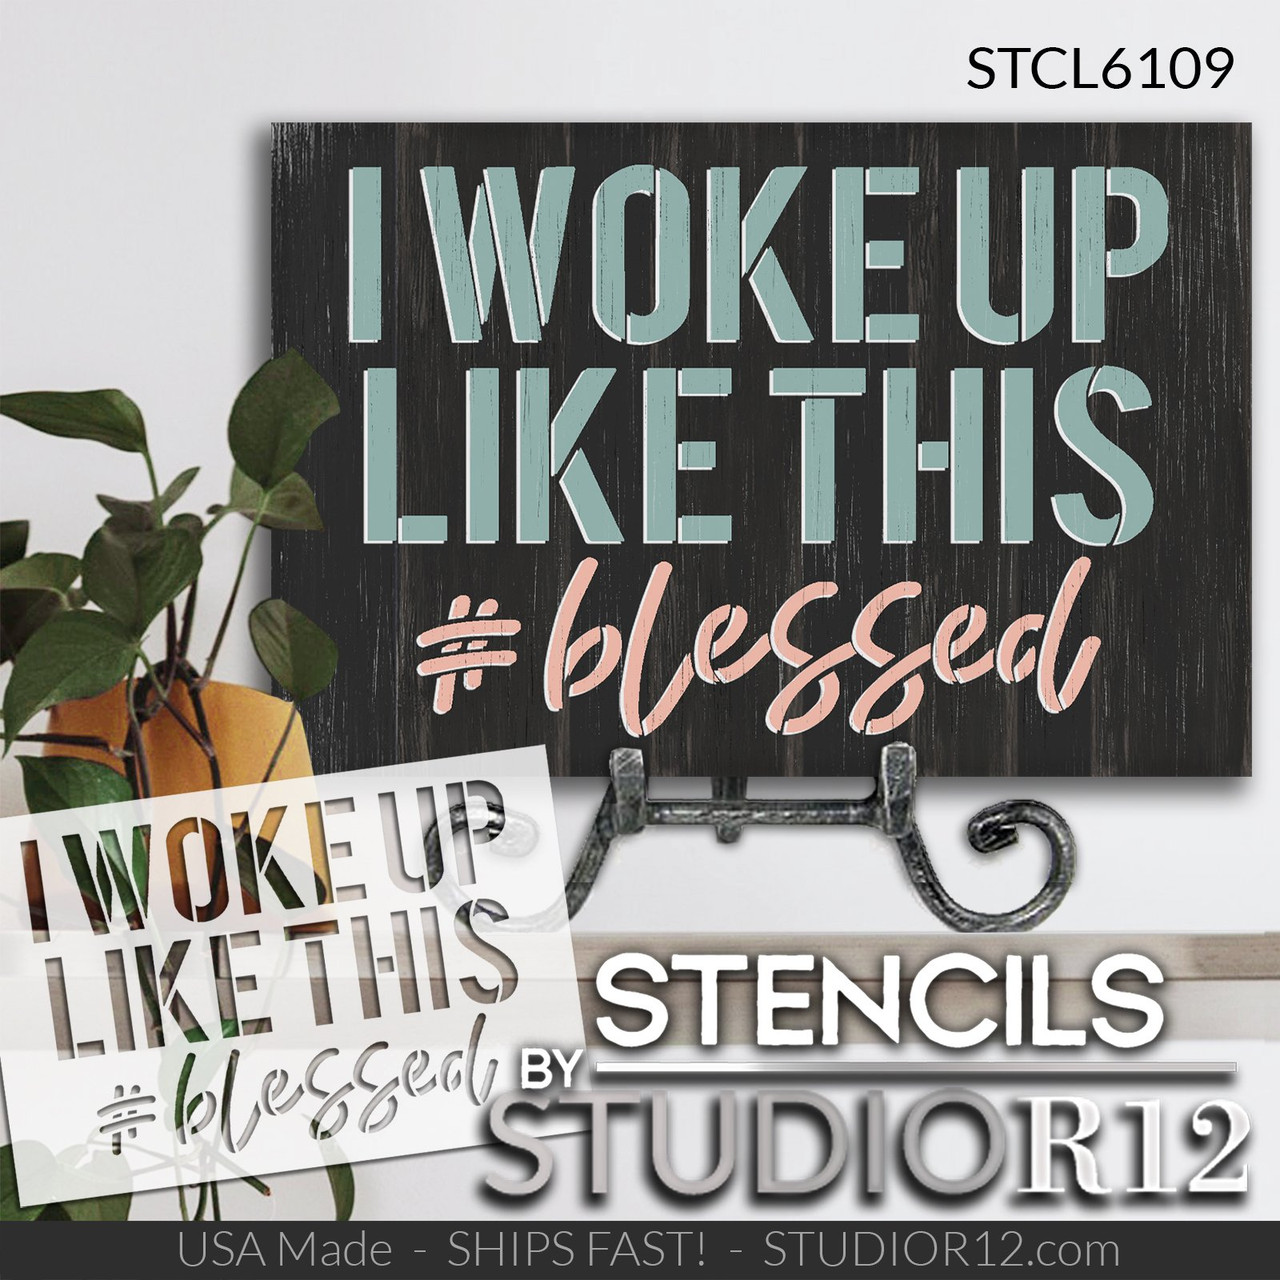 Woke Up Like This #Blessed Stencil by StudioR12 | Craft DIY Inspirational Home Decor | Paint Wood Sign | Reusable Mylar Template | Select Size